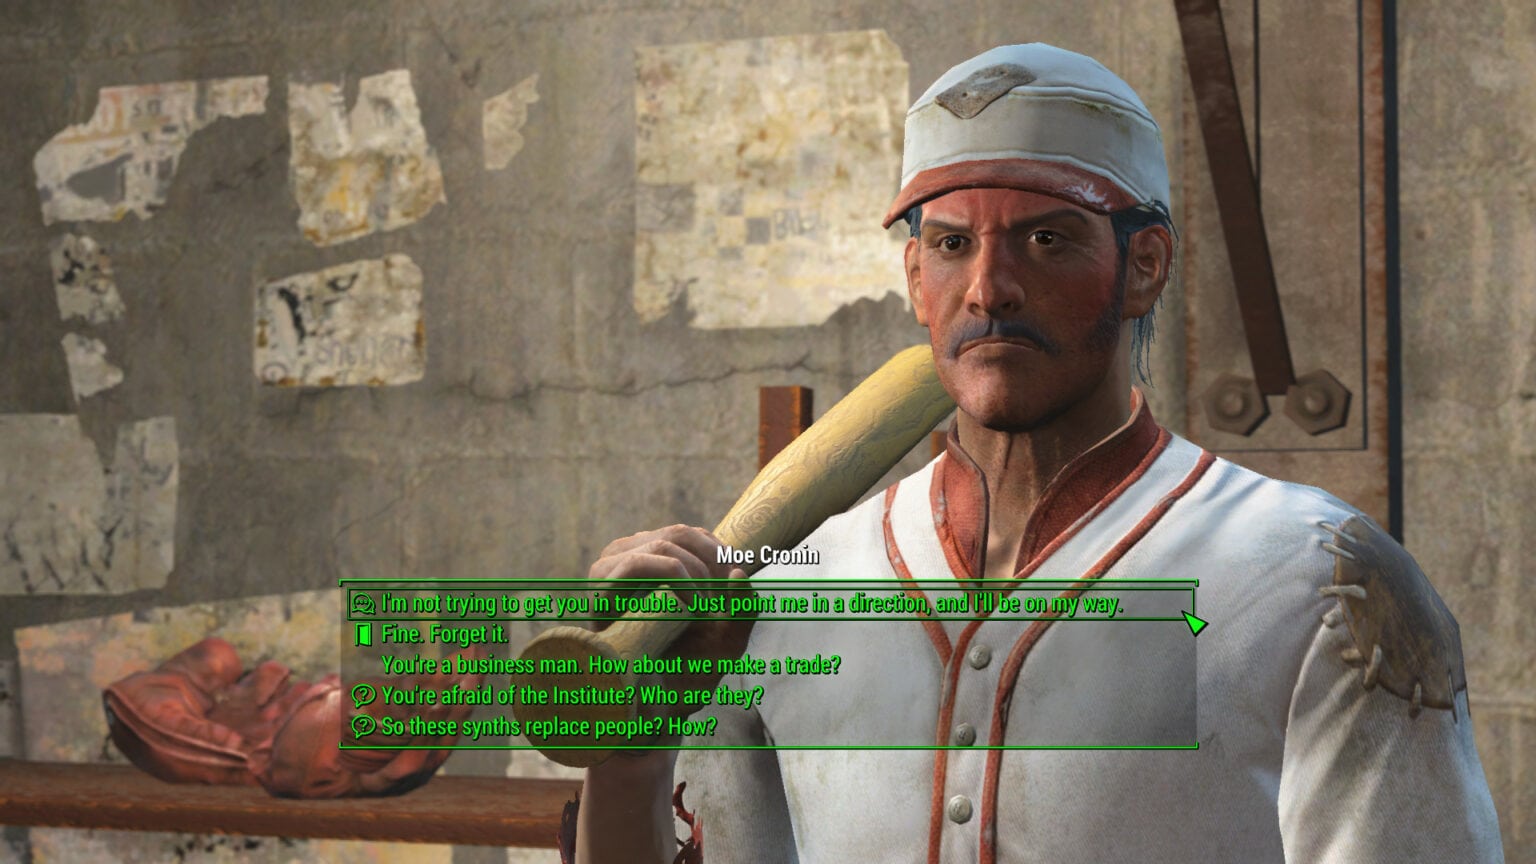 Extended Dialogue Interface Fallout 4 - nowmods.com